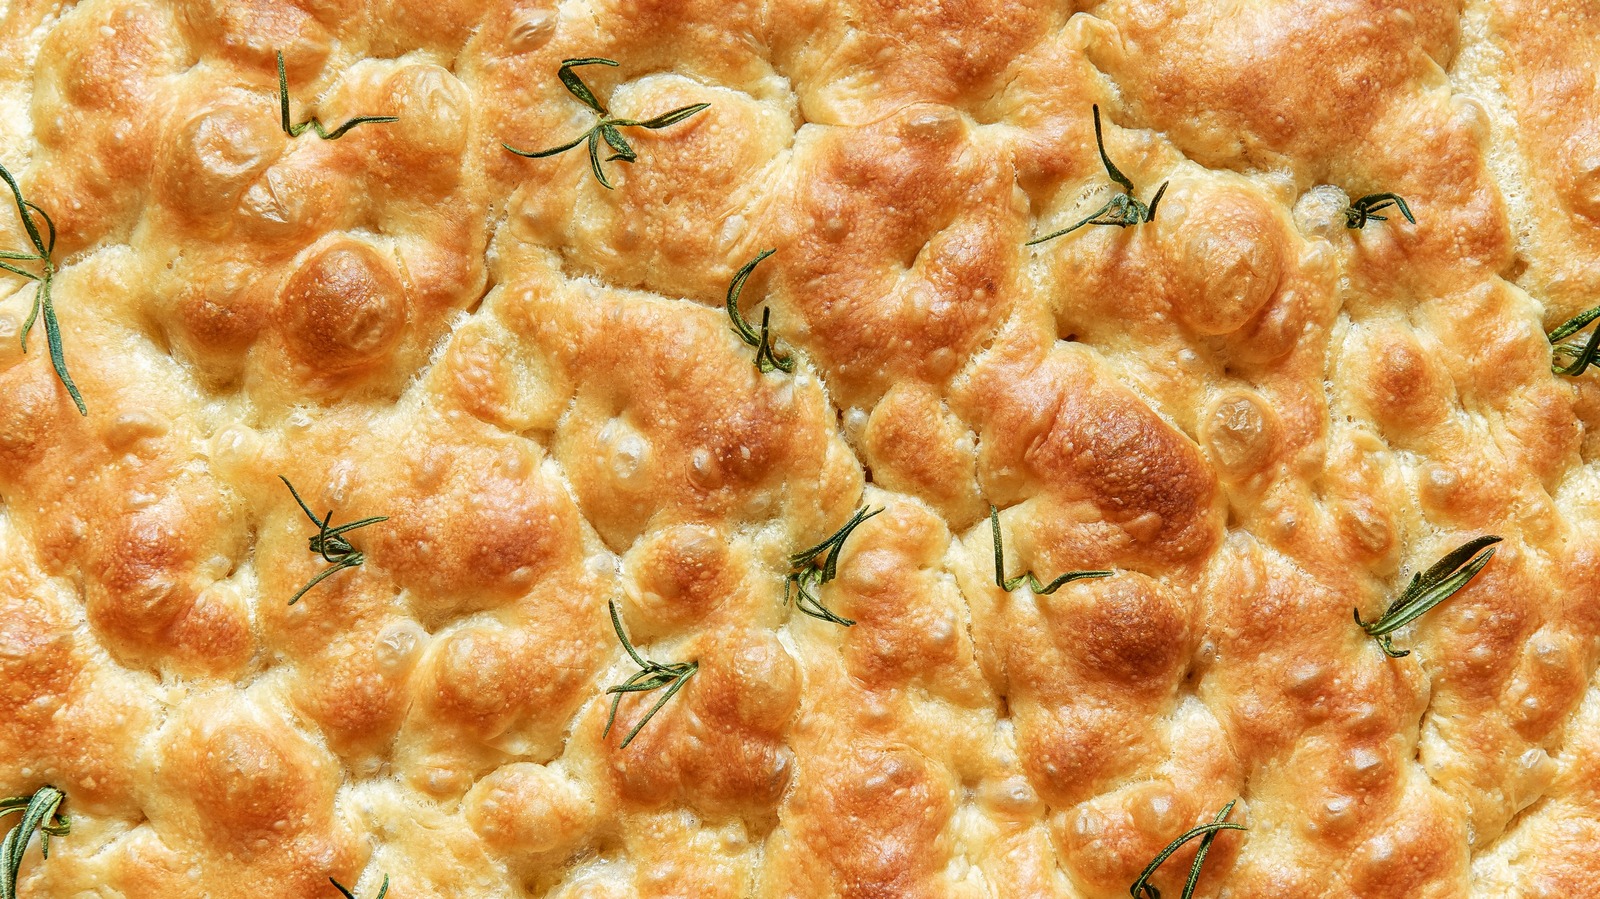 https://www.tastingtable.com/img/gallery/for-single-serving-focaccia-break-out-your-mini-loaf-pan/l-intro-1676560901.jpg